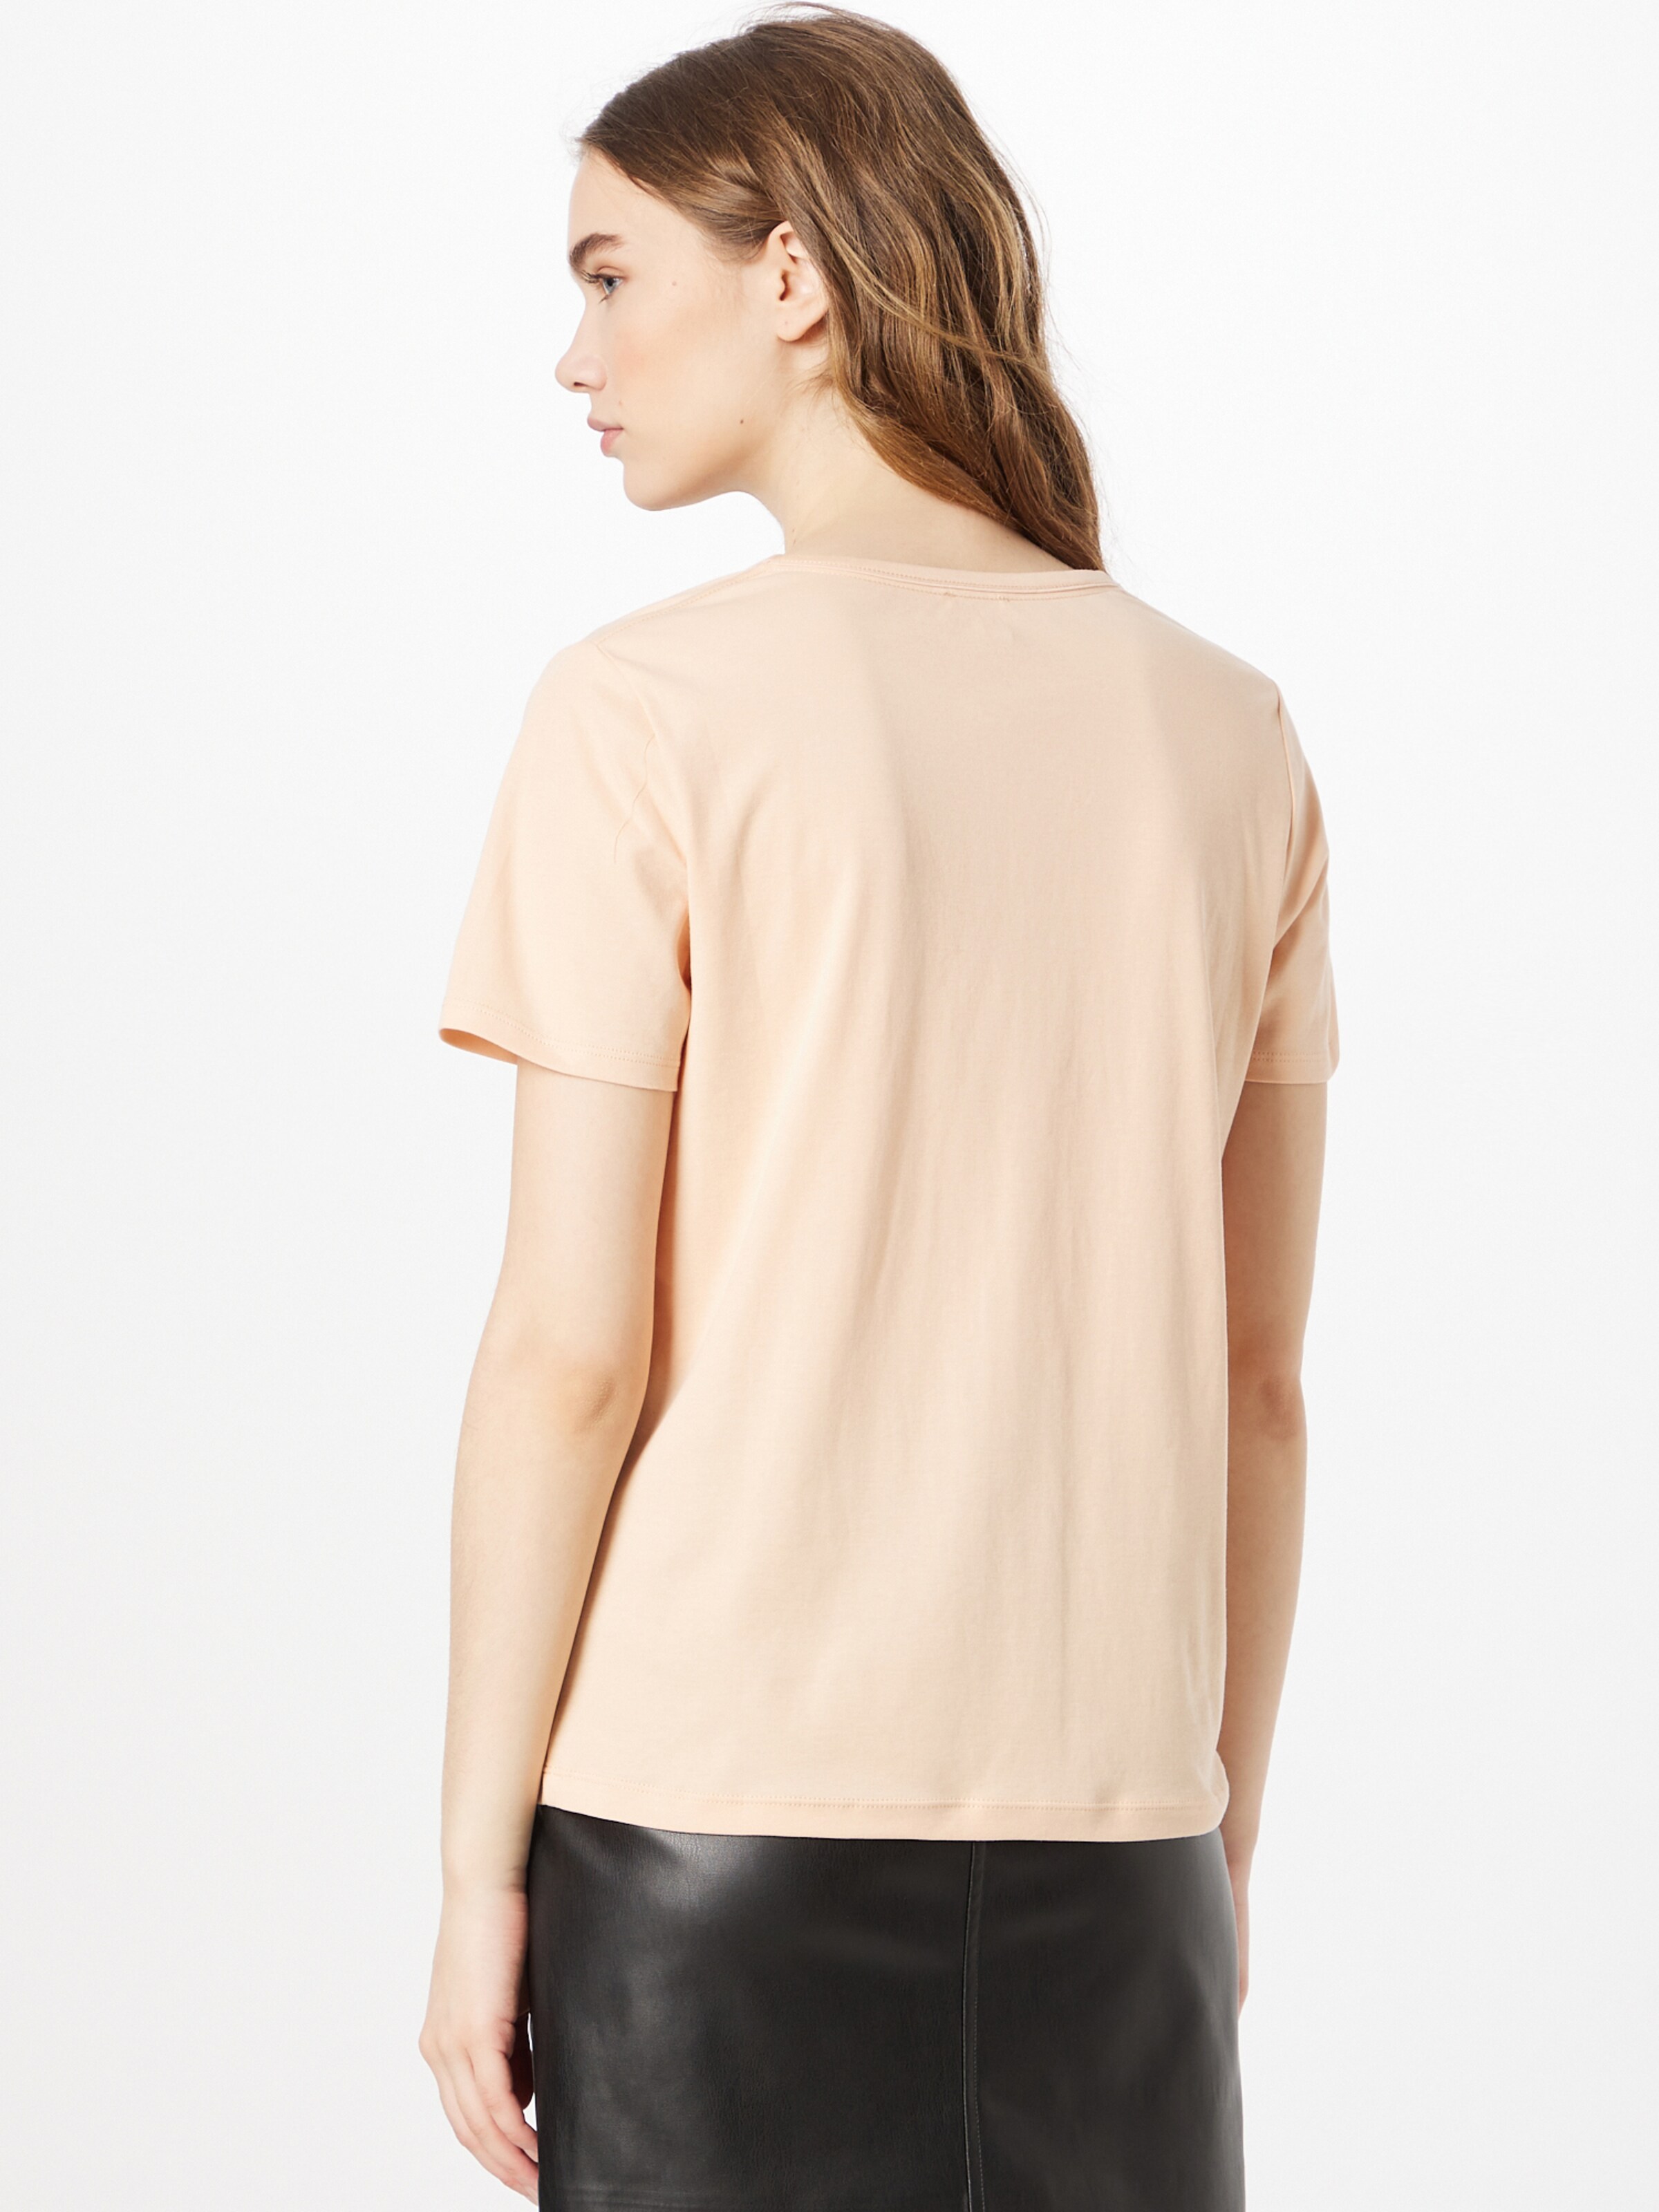 Frauen Shirts & Tops s.Oliver Shirt in Nude - DZ99705